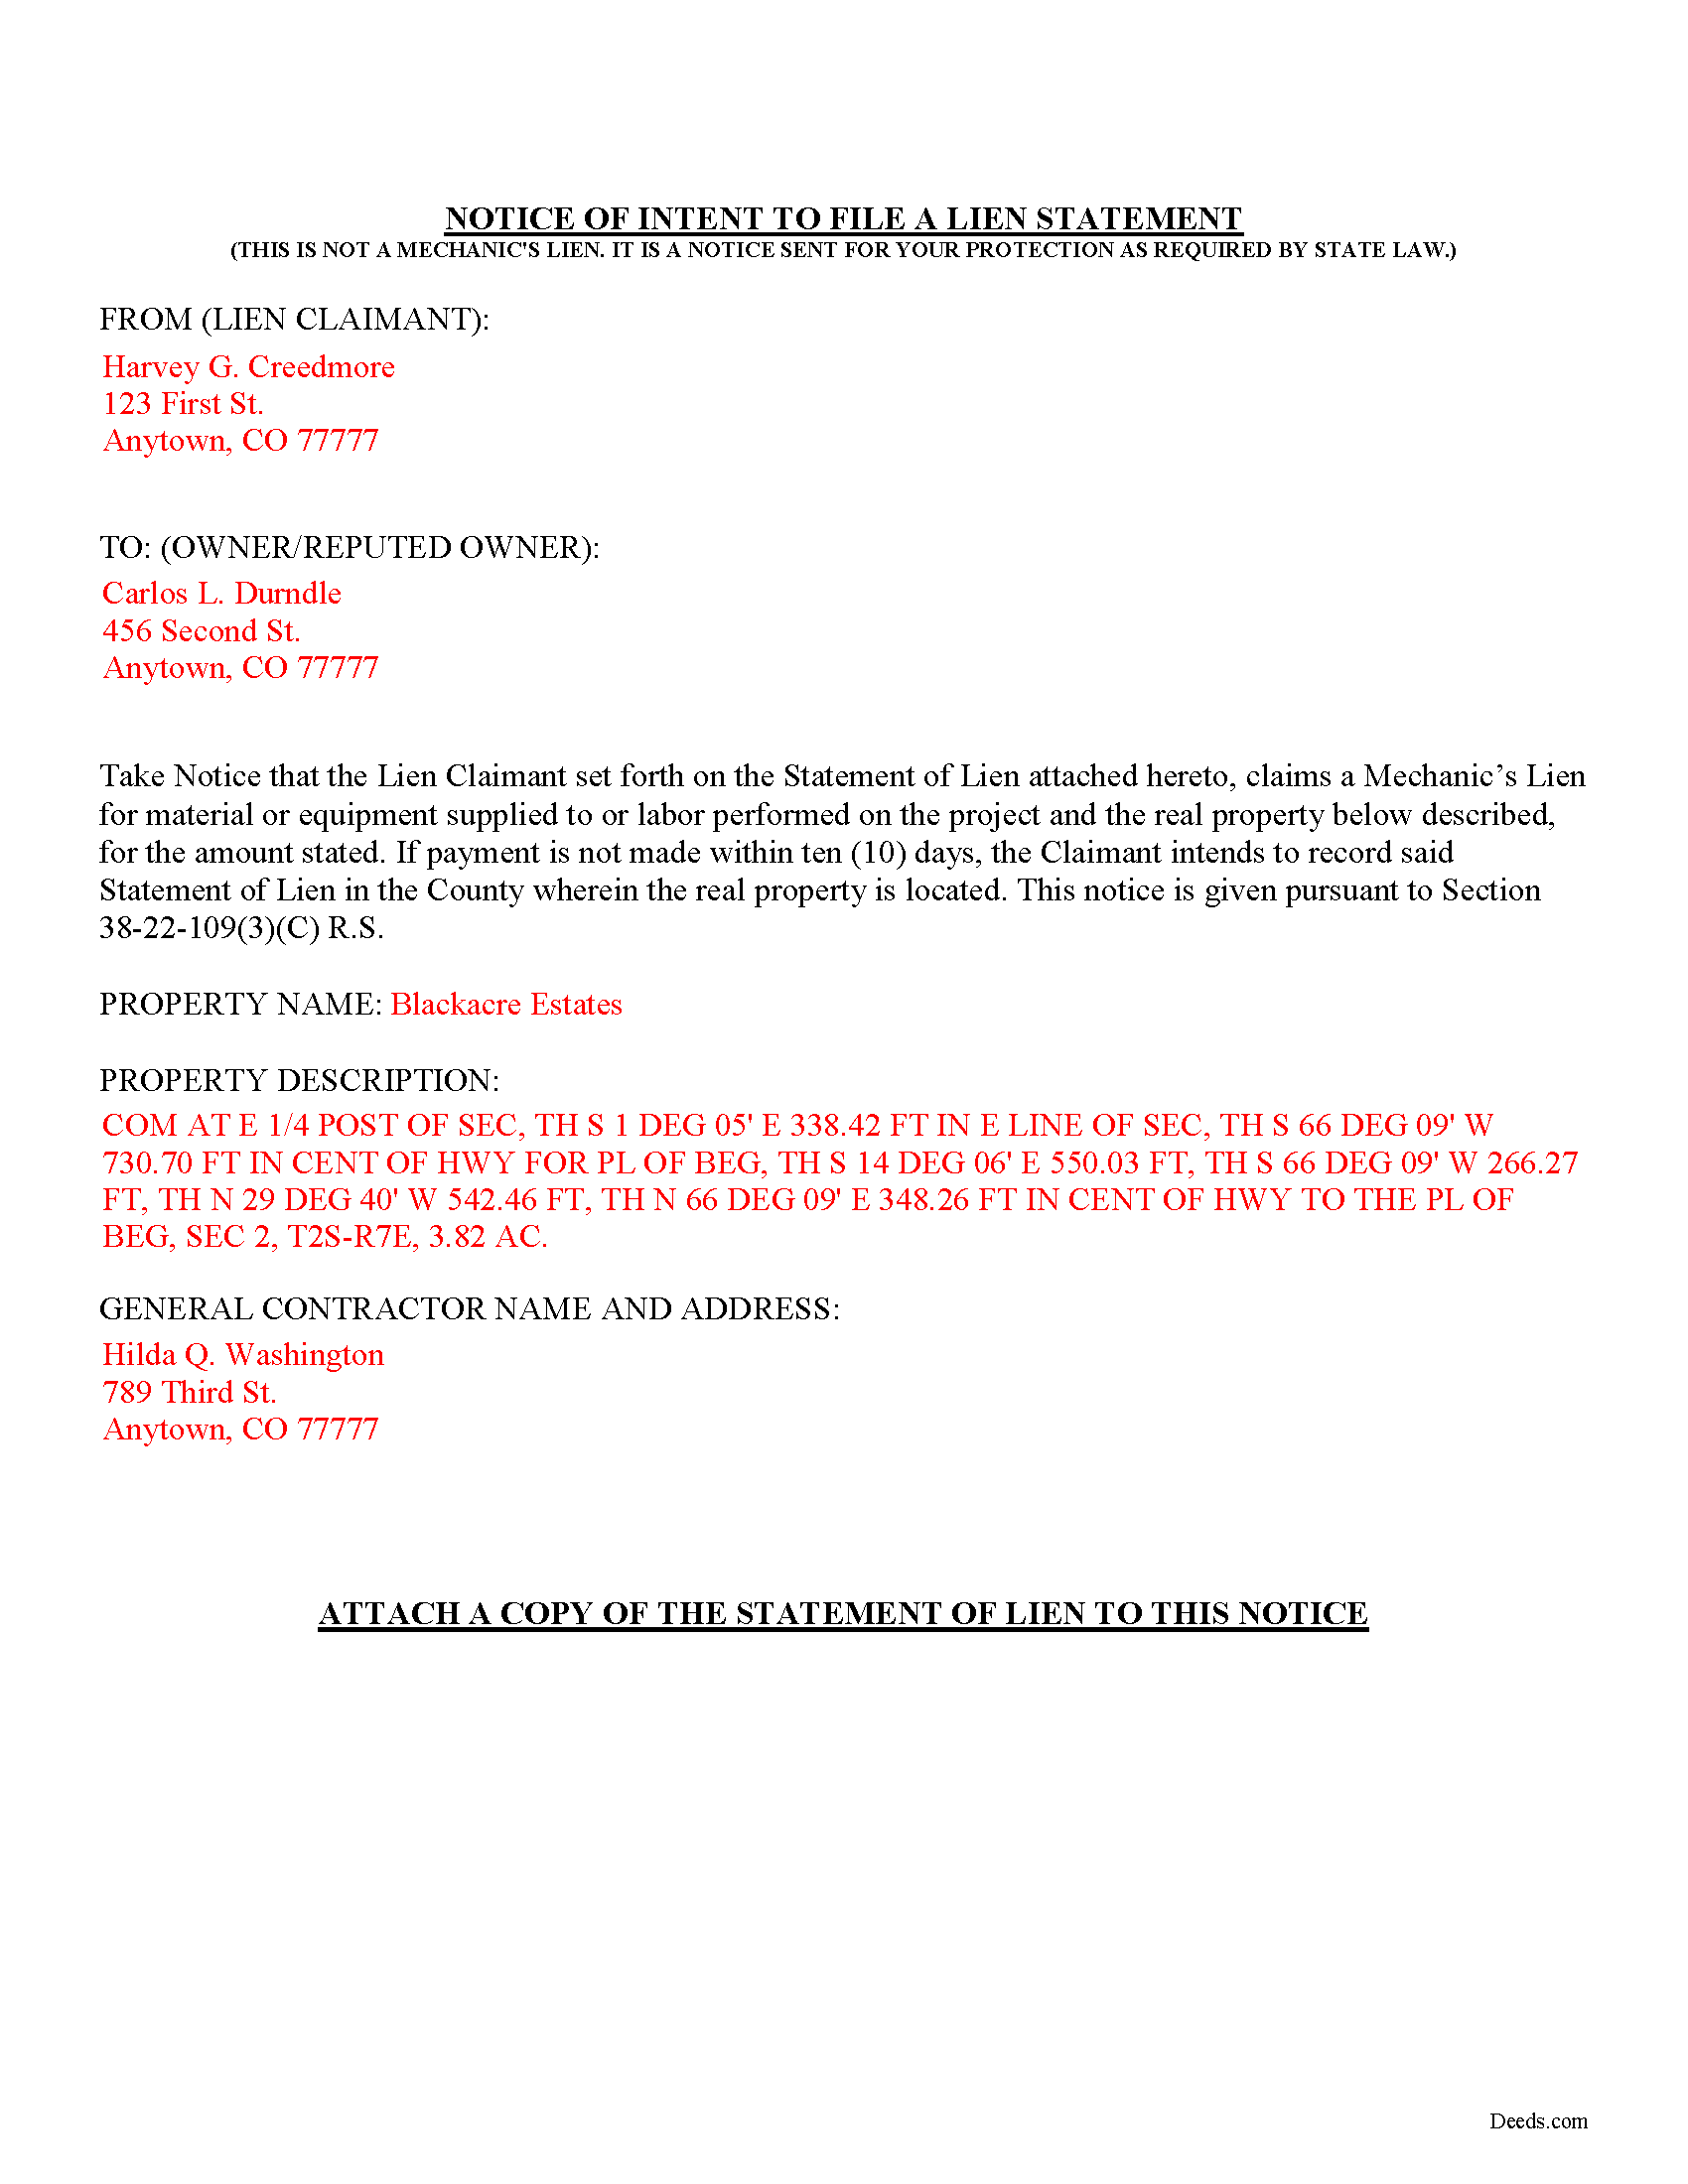 Completed Example of the Preliminary Notice of Mechanics Lien Document